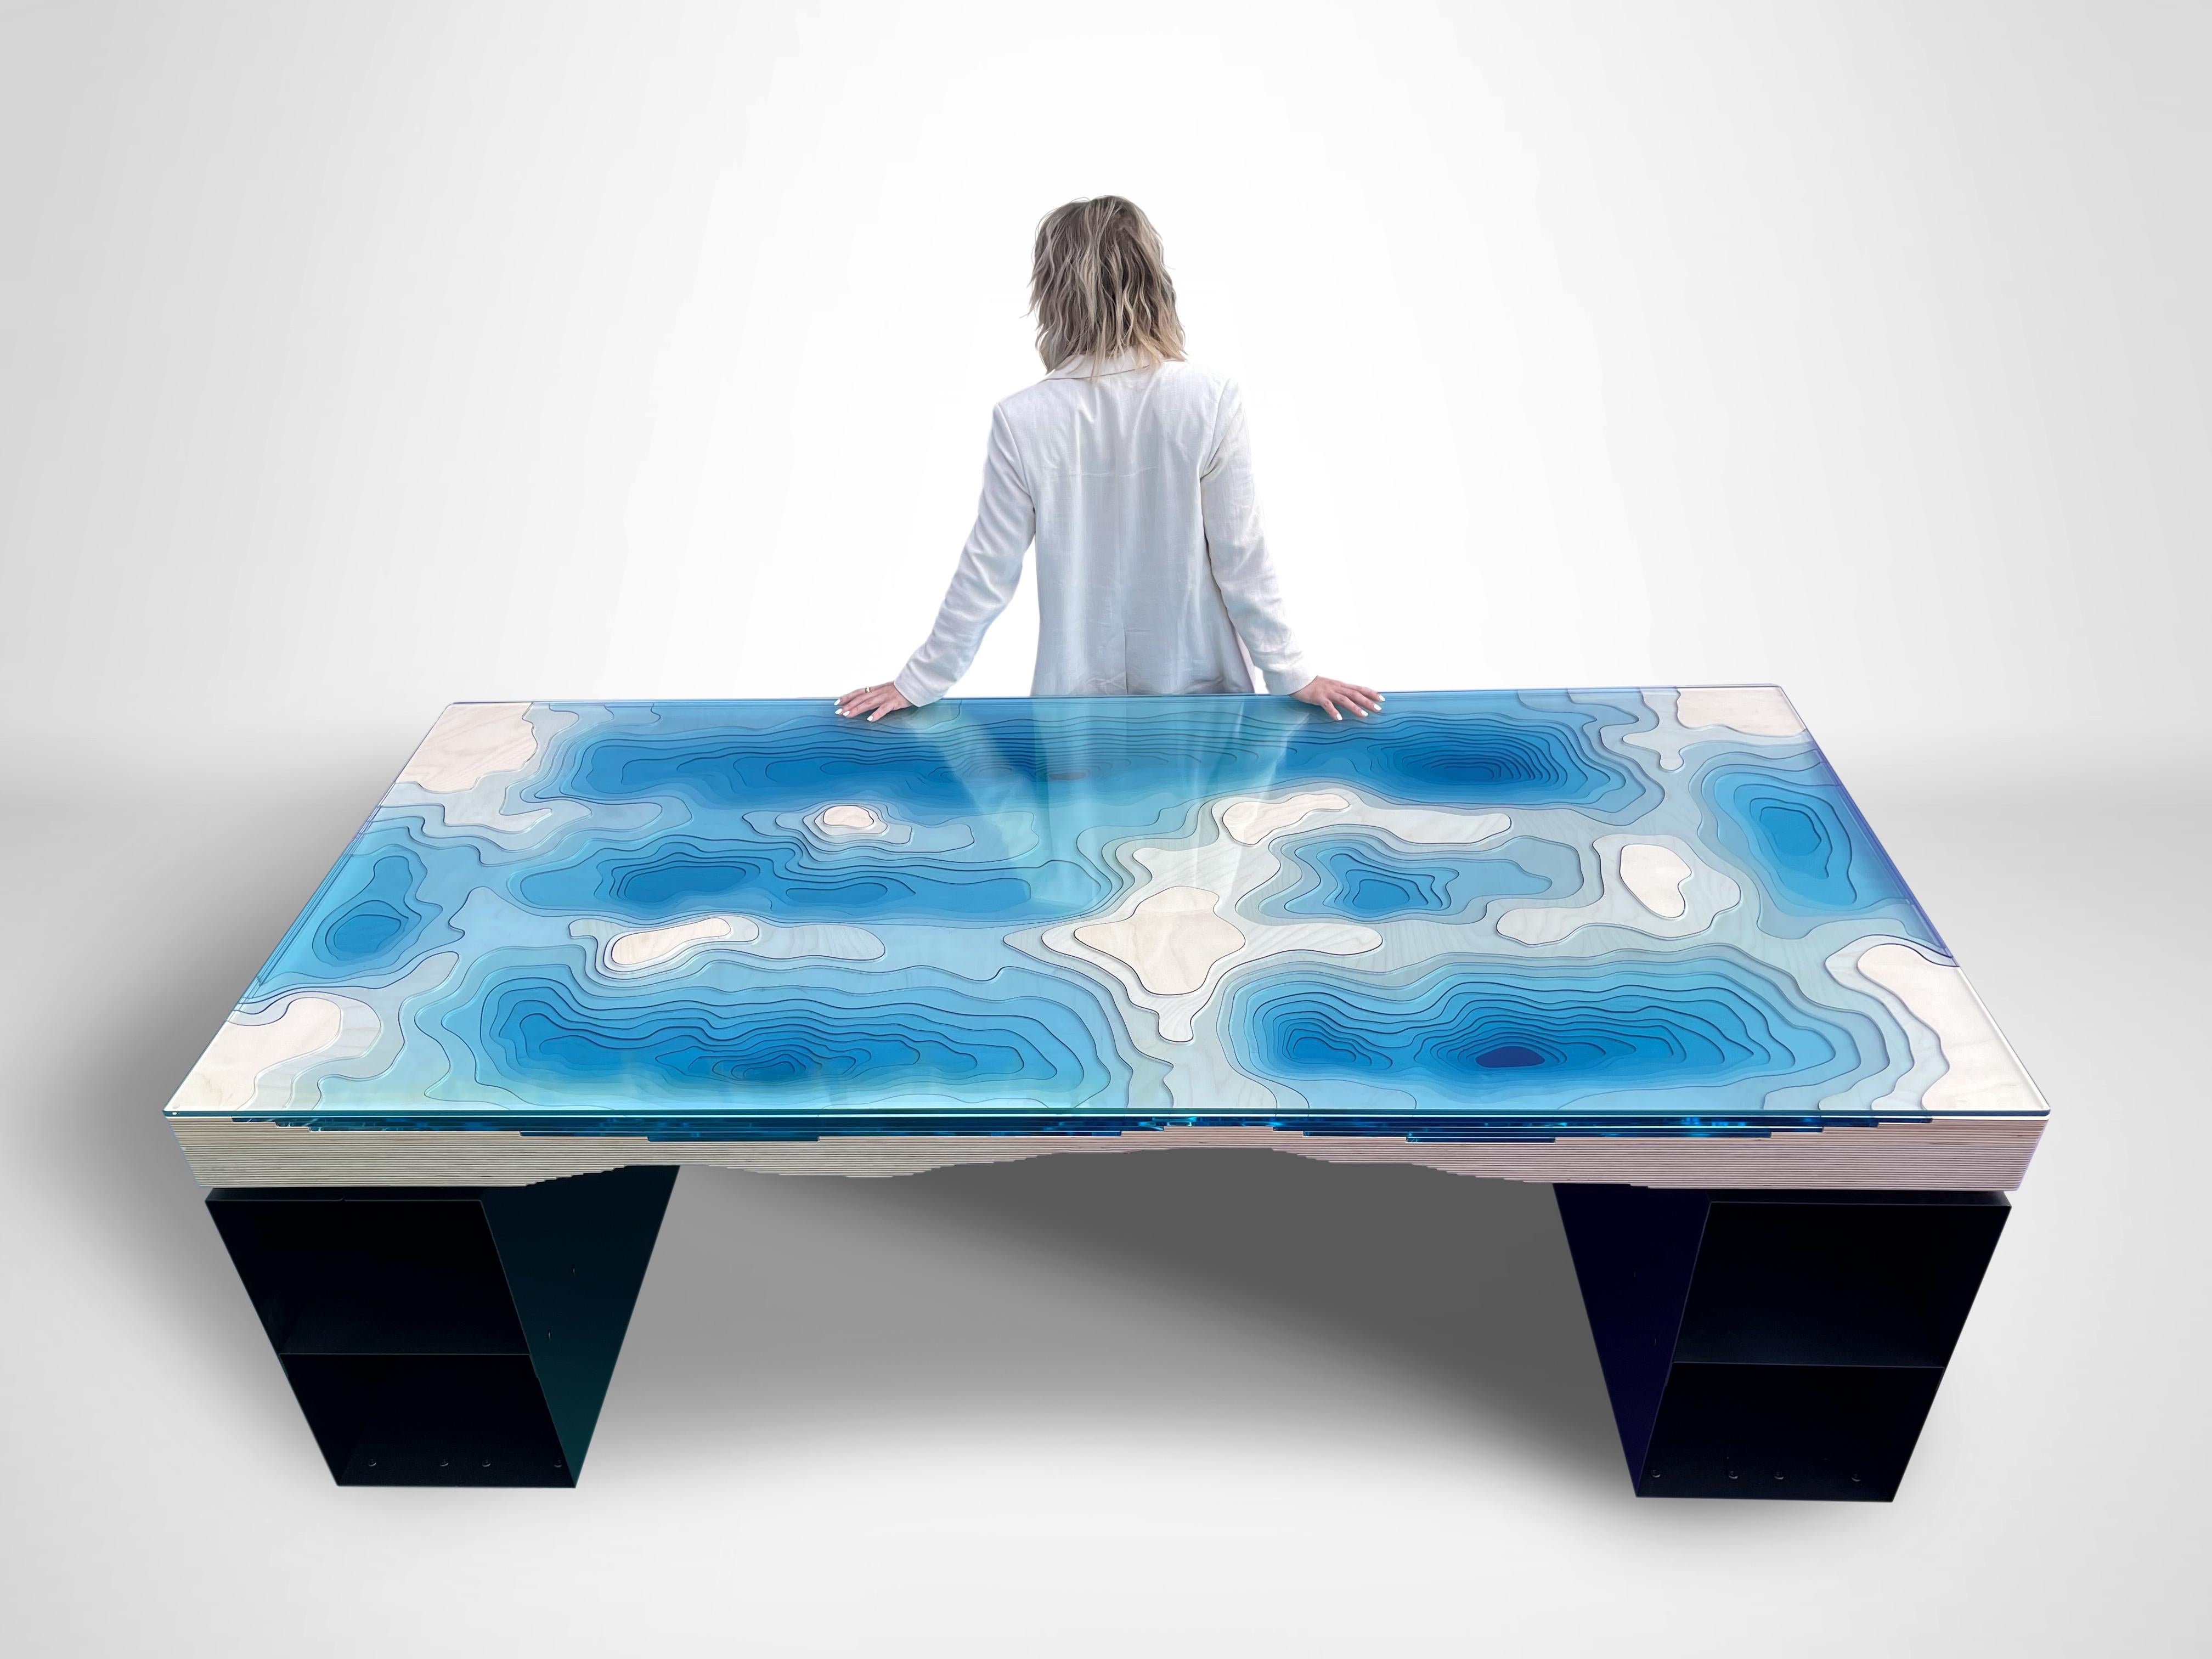 A modern piece of statement furniture from British designer Christopher Duffy. 

The Abyss Desk expands Duffy London's explorations of depth with a mesmerizing depiction of the Earth’s seabed, played out in vivid turquoise colours and grounded on